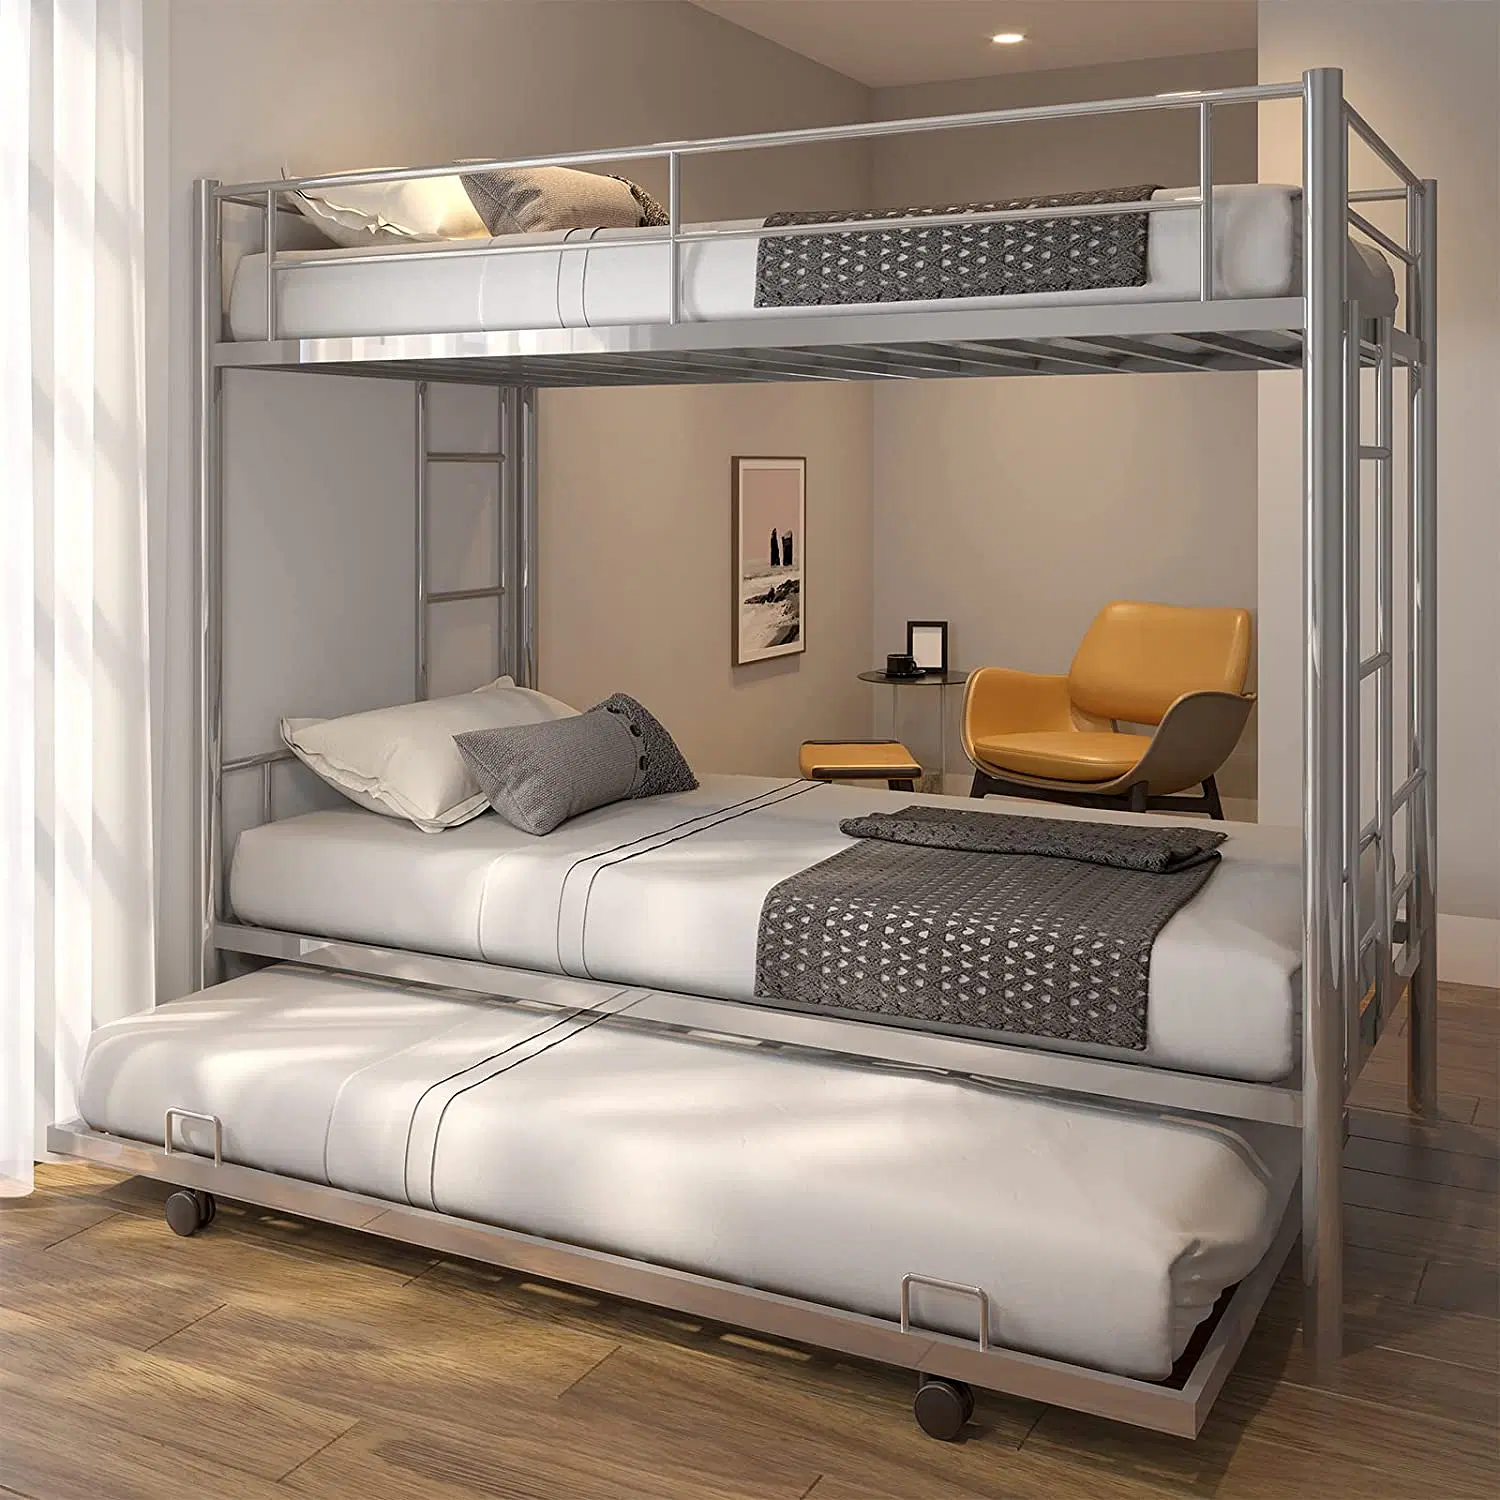 Purchasing a Bunk Bed